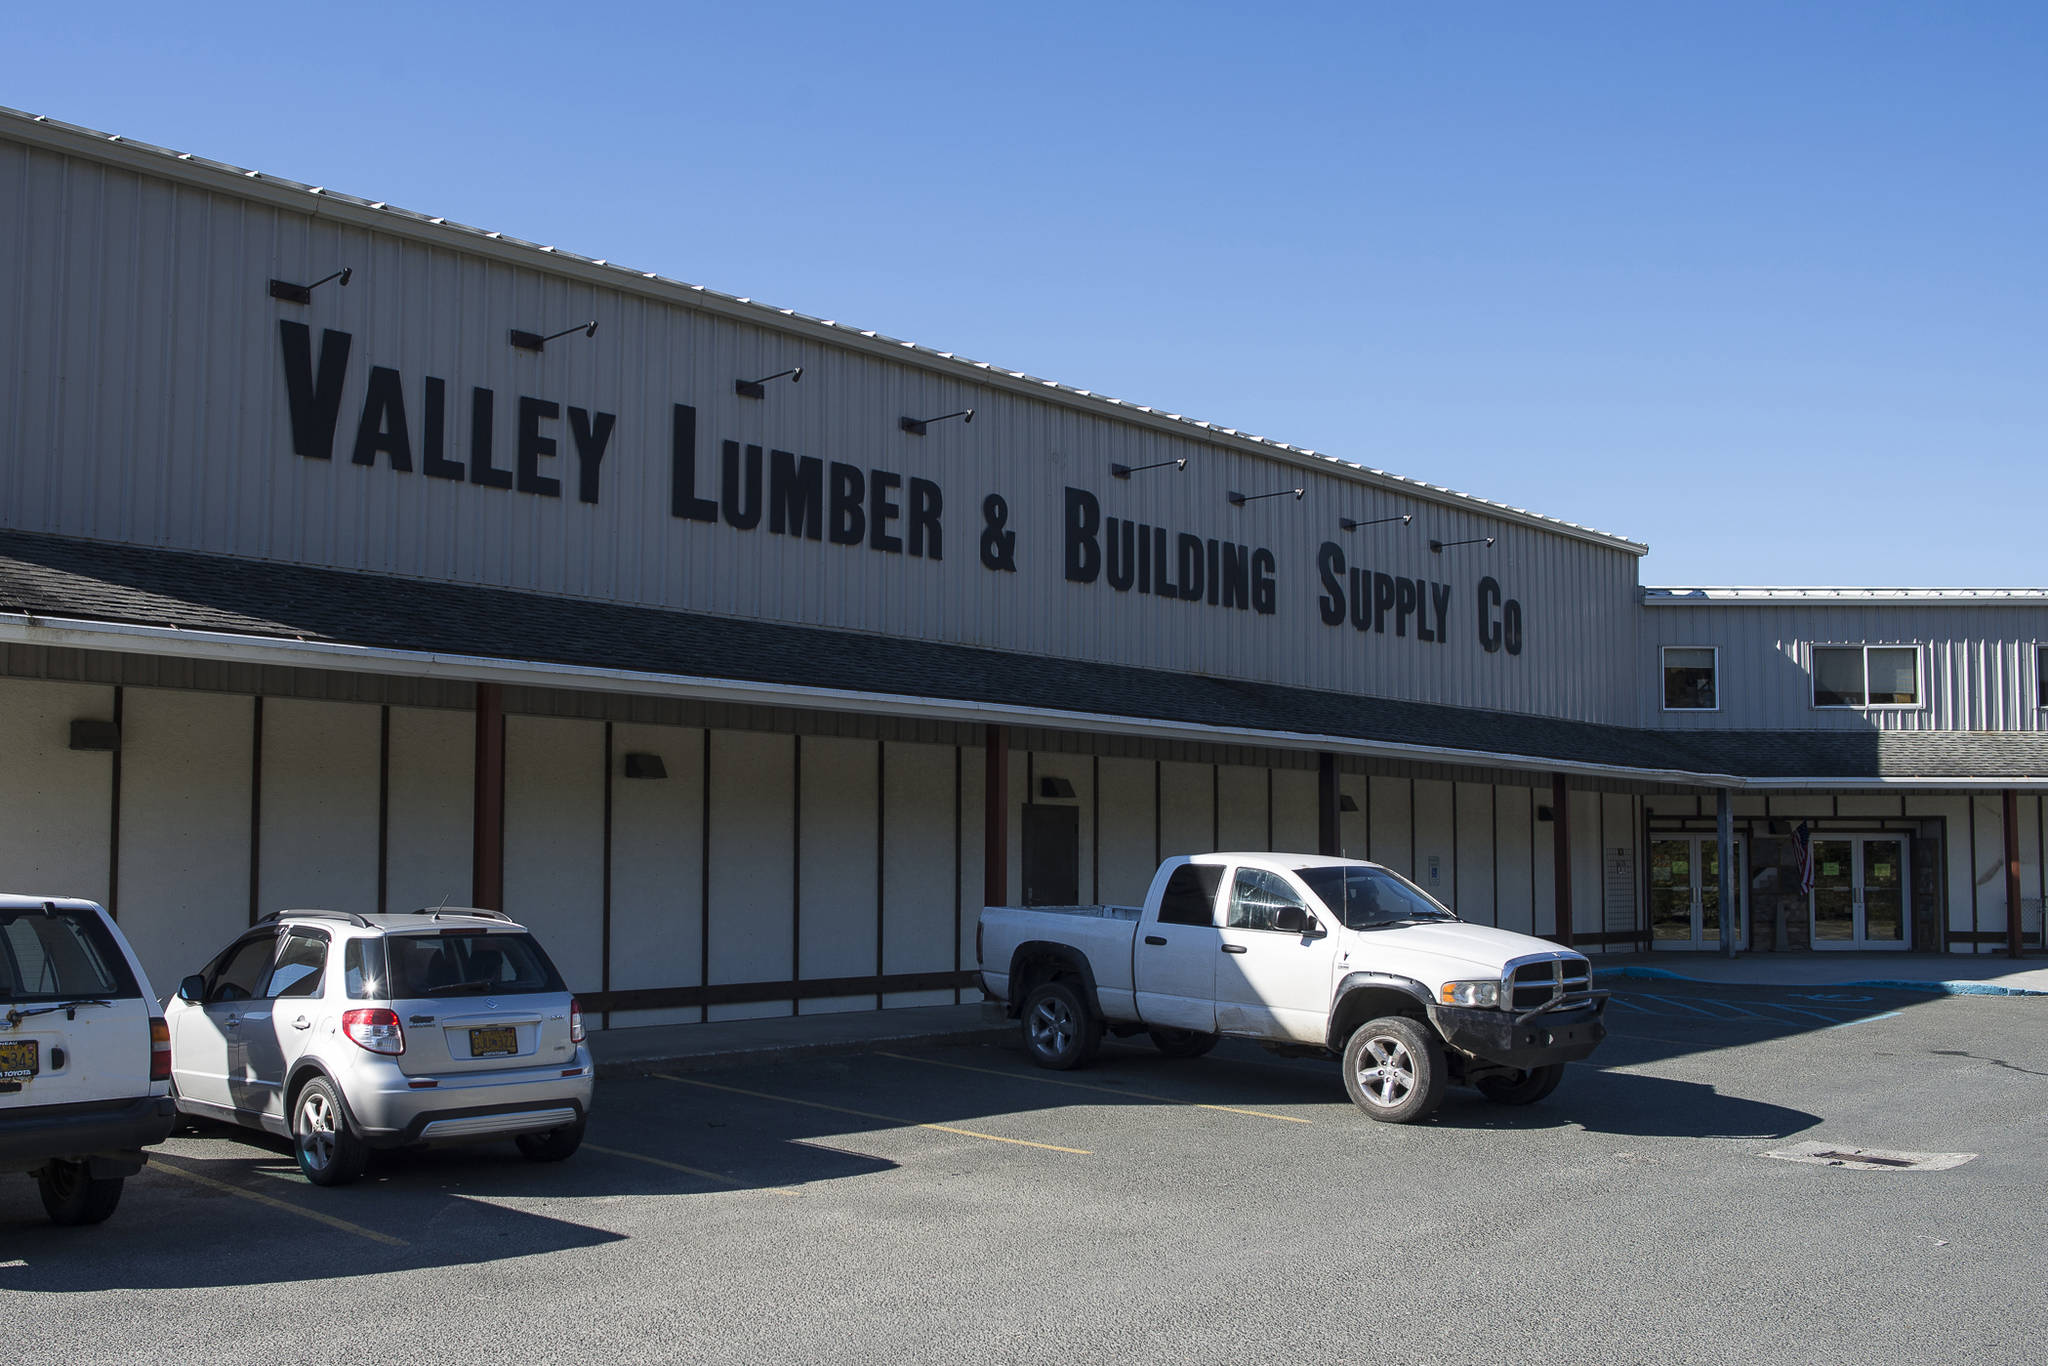 Valley Lumber & Building Supply Company has been sold to Bruce Abel, who owns Don Abel Building Supply. (Michael Penn | Juneau Empire)